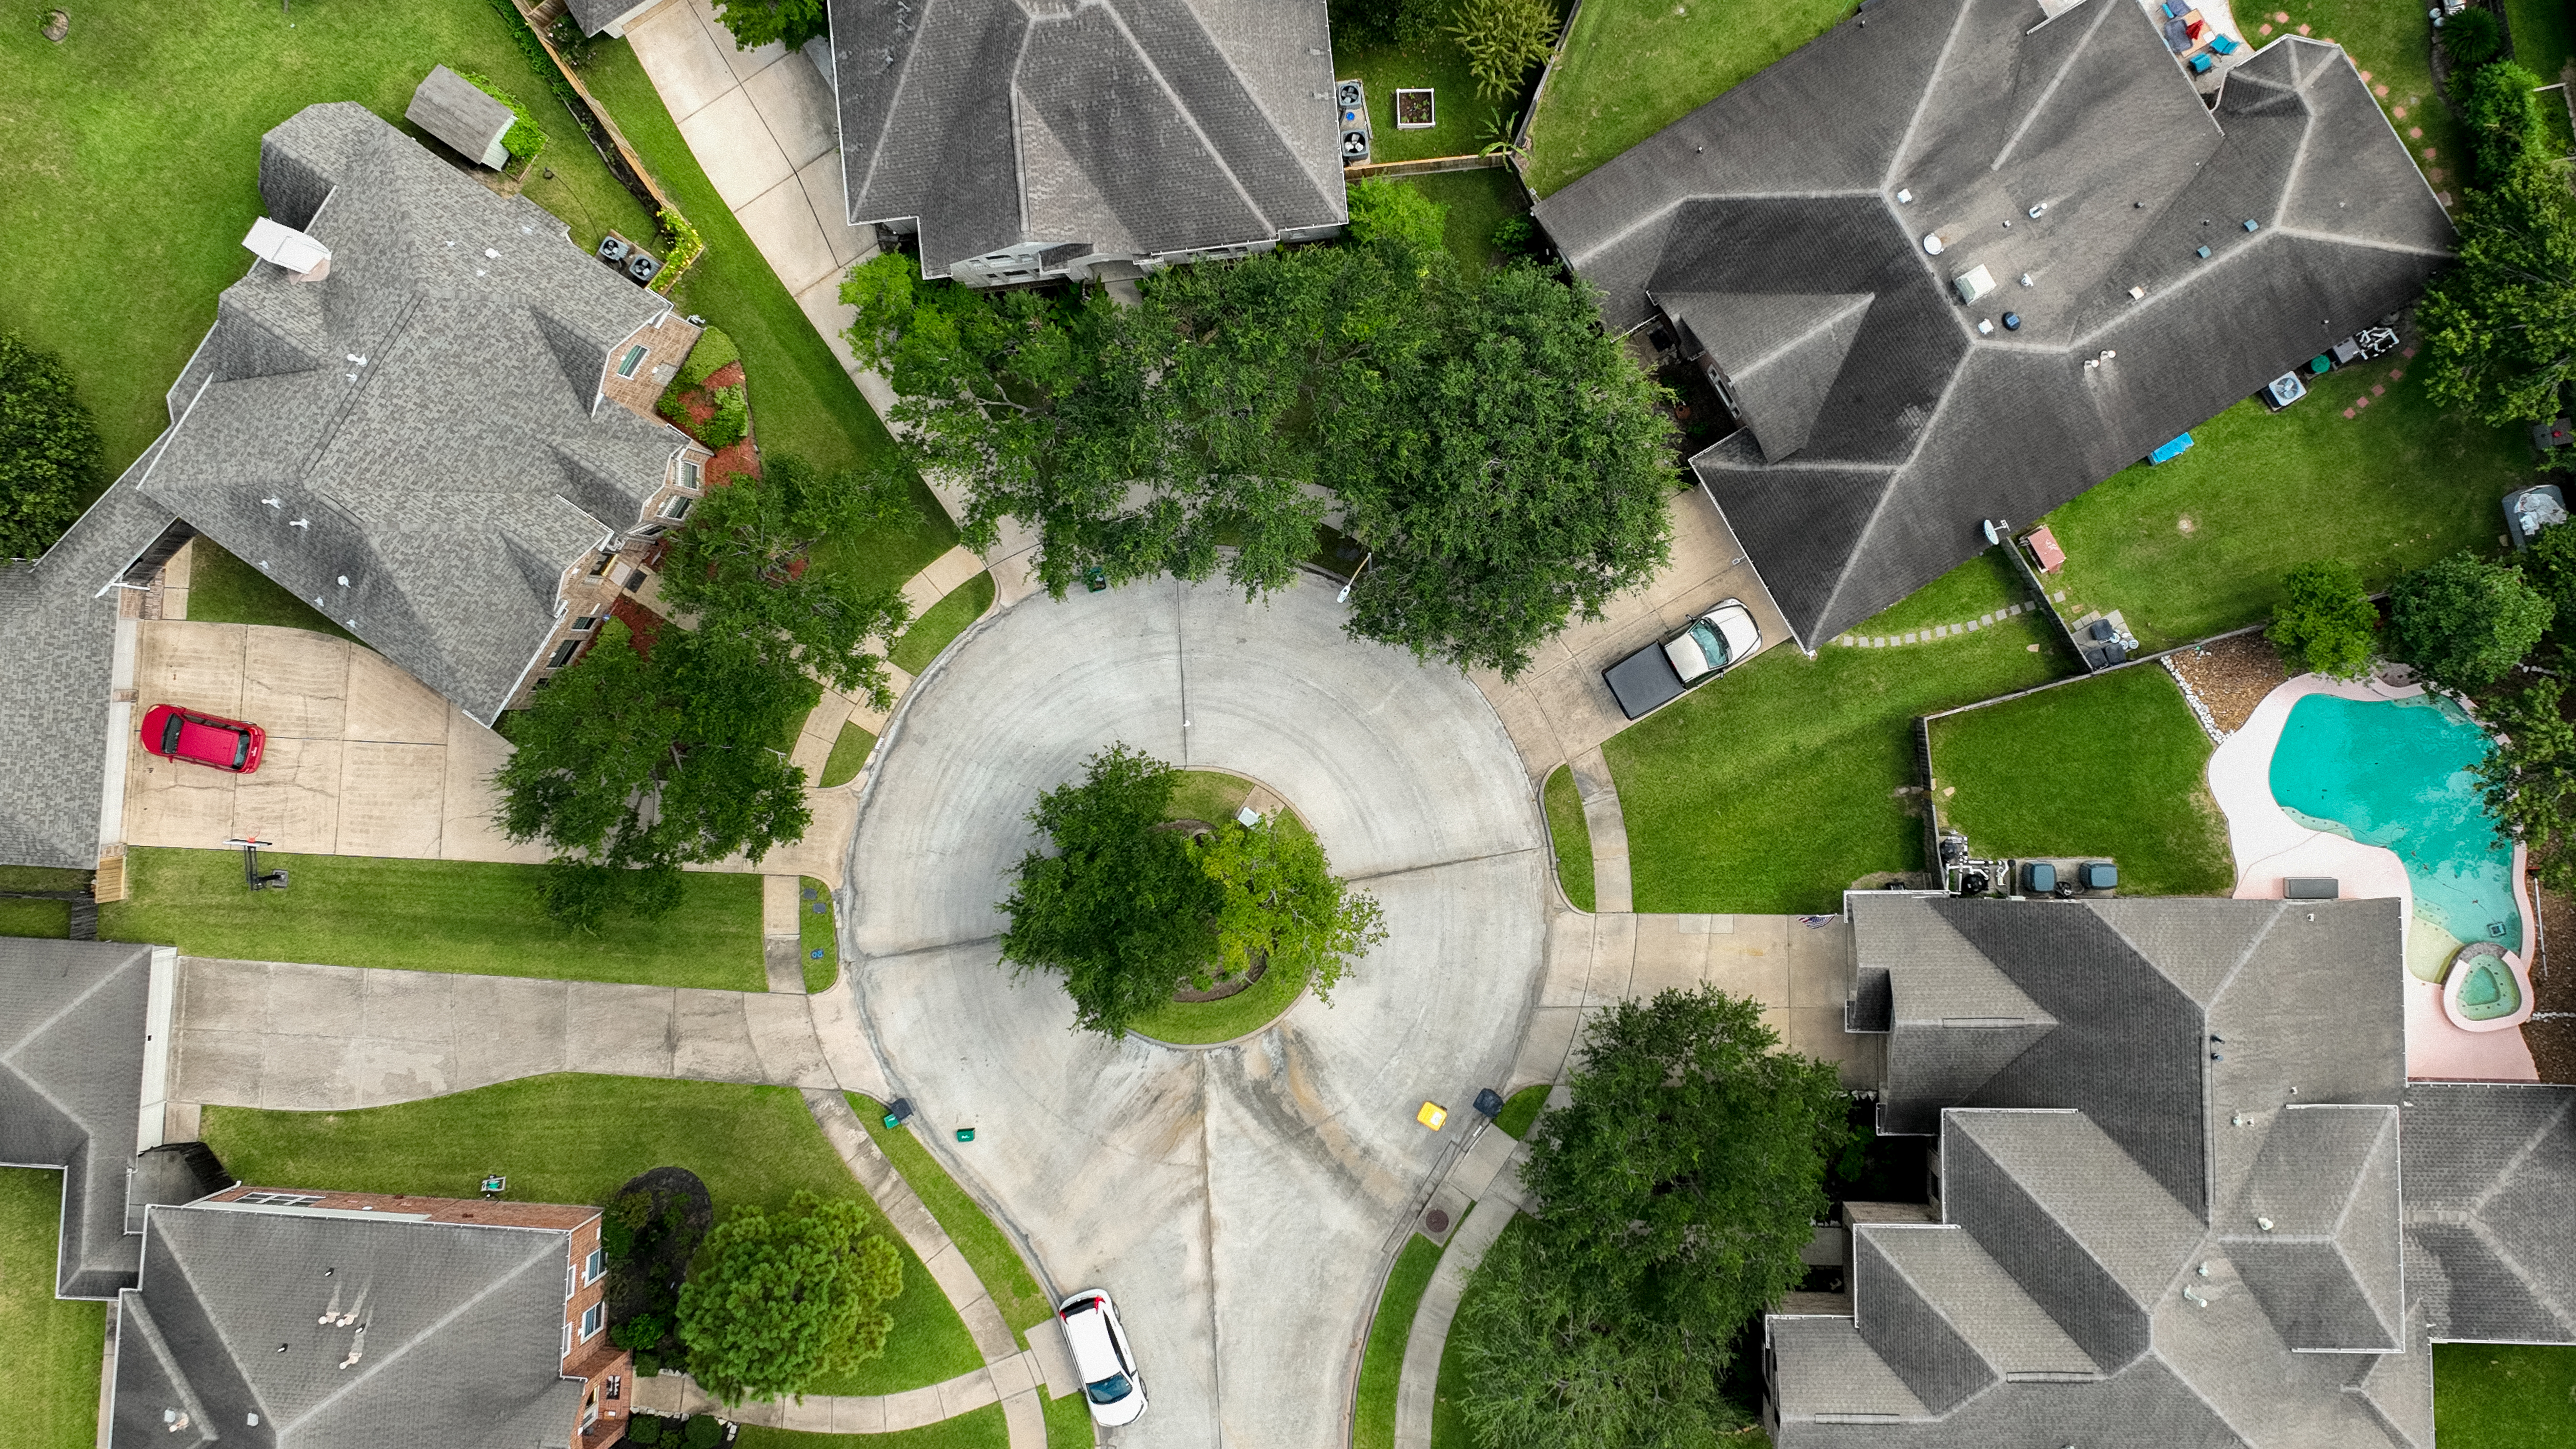 In an aerial view, homes are seen in a residential neighborhood on September 15, 2022 in Pearland, Texas. (Photo by Brandon Bell/Getty Images)